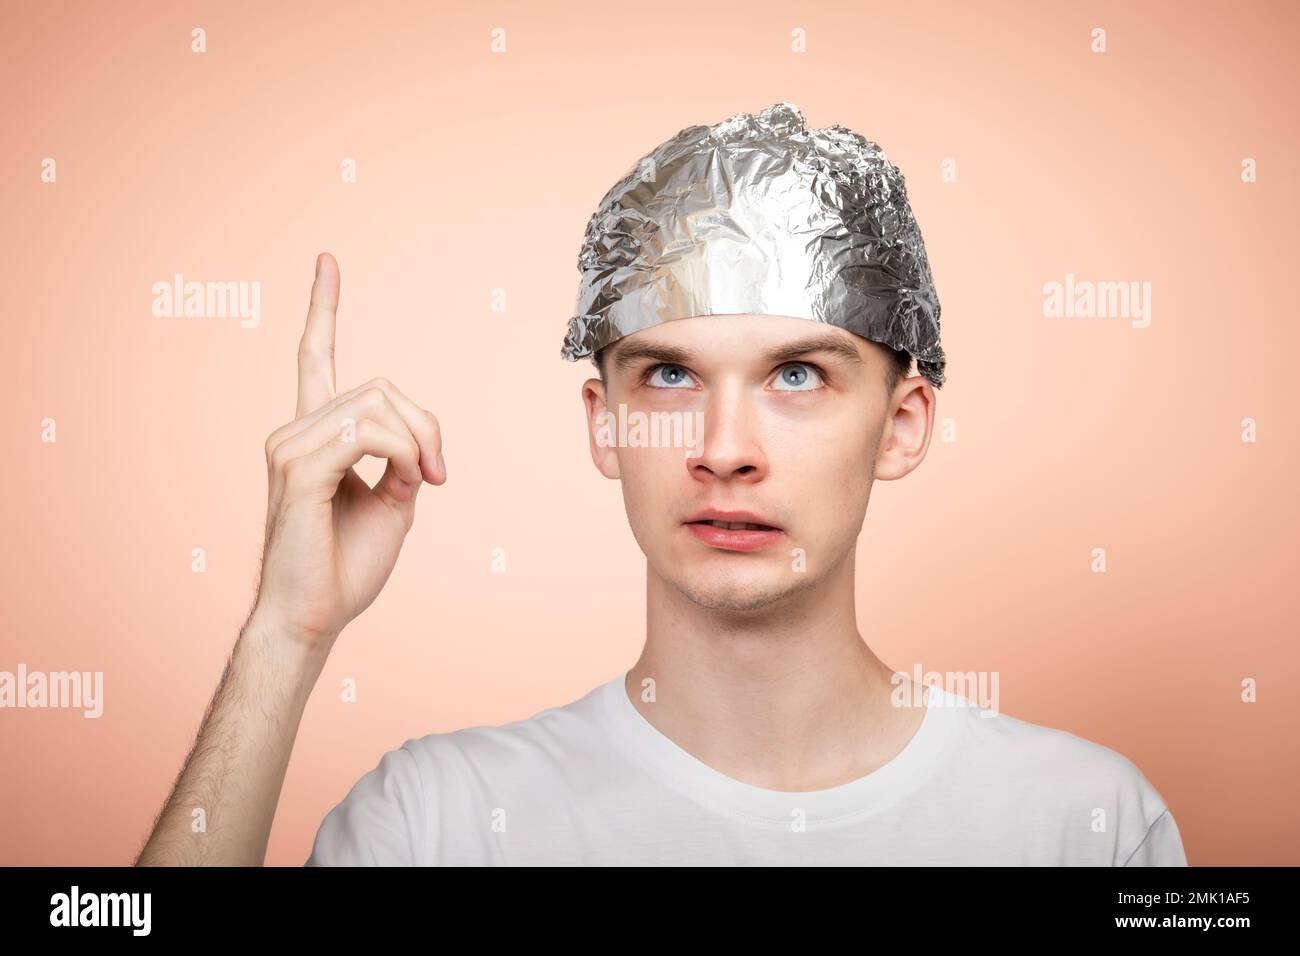 Portrait of anxious young man wearing tin foil hat pointing his finger and looking up. Conspiracy theories and paranoya concept. Studio shot on salmon Stock Photo